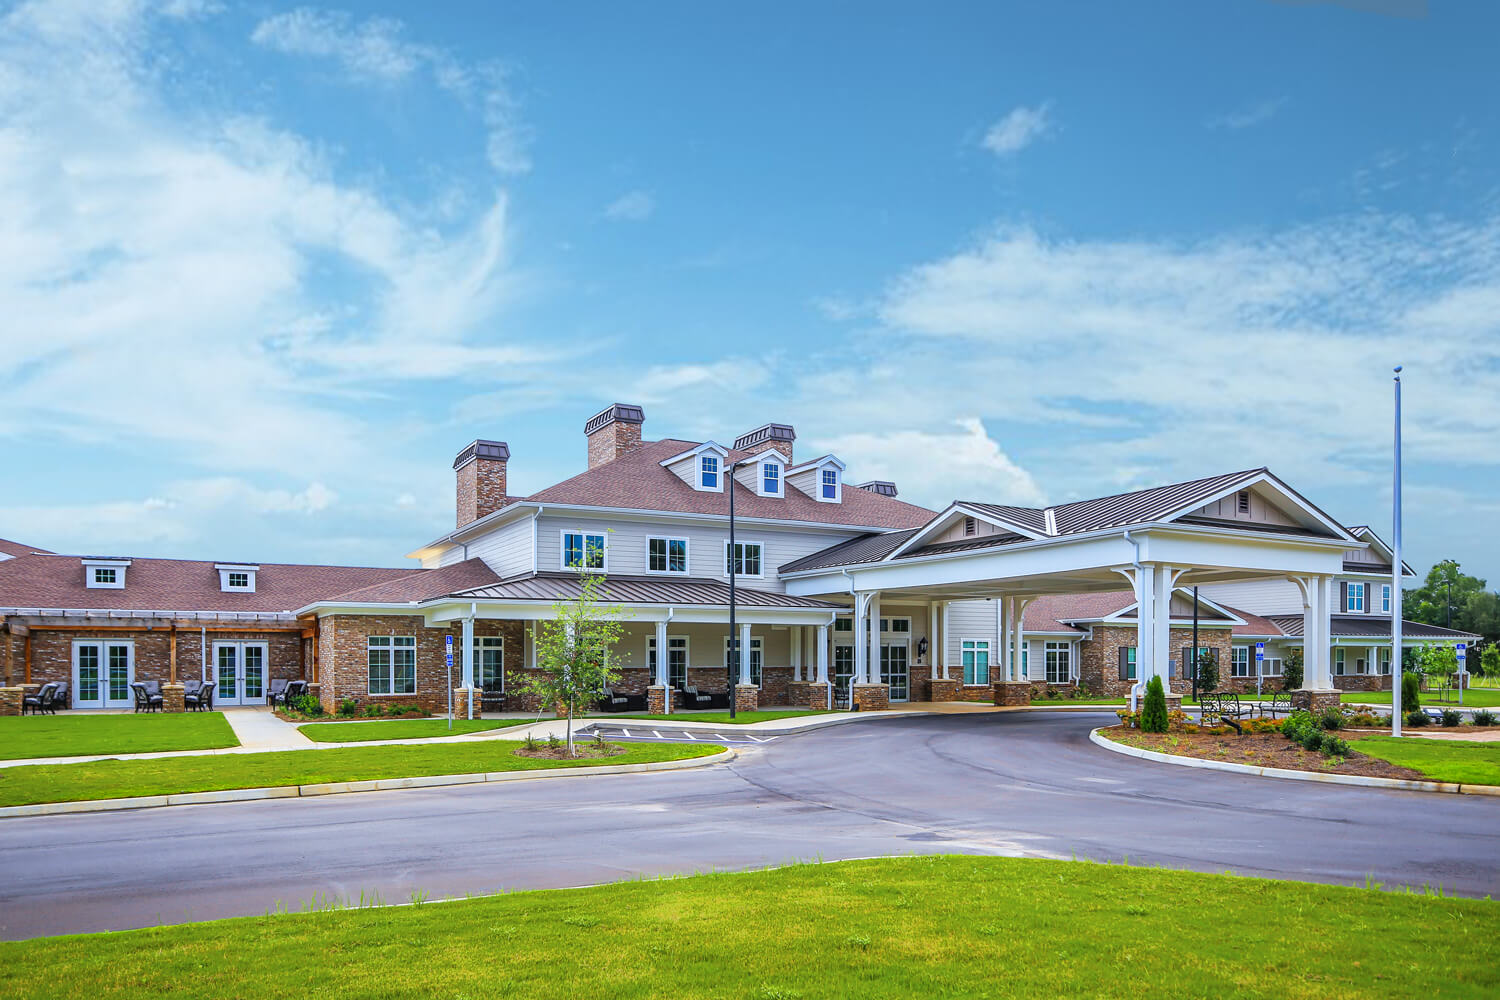 Grand South Senior Living - Main View from Front - Designed by Foshee Architecture